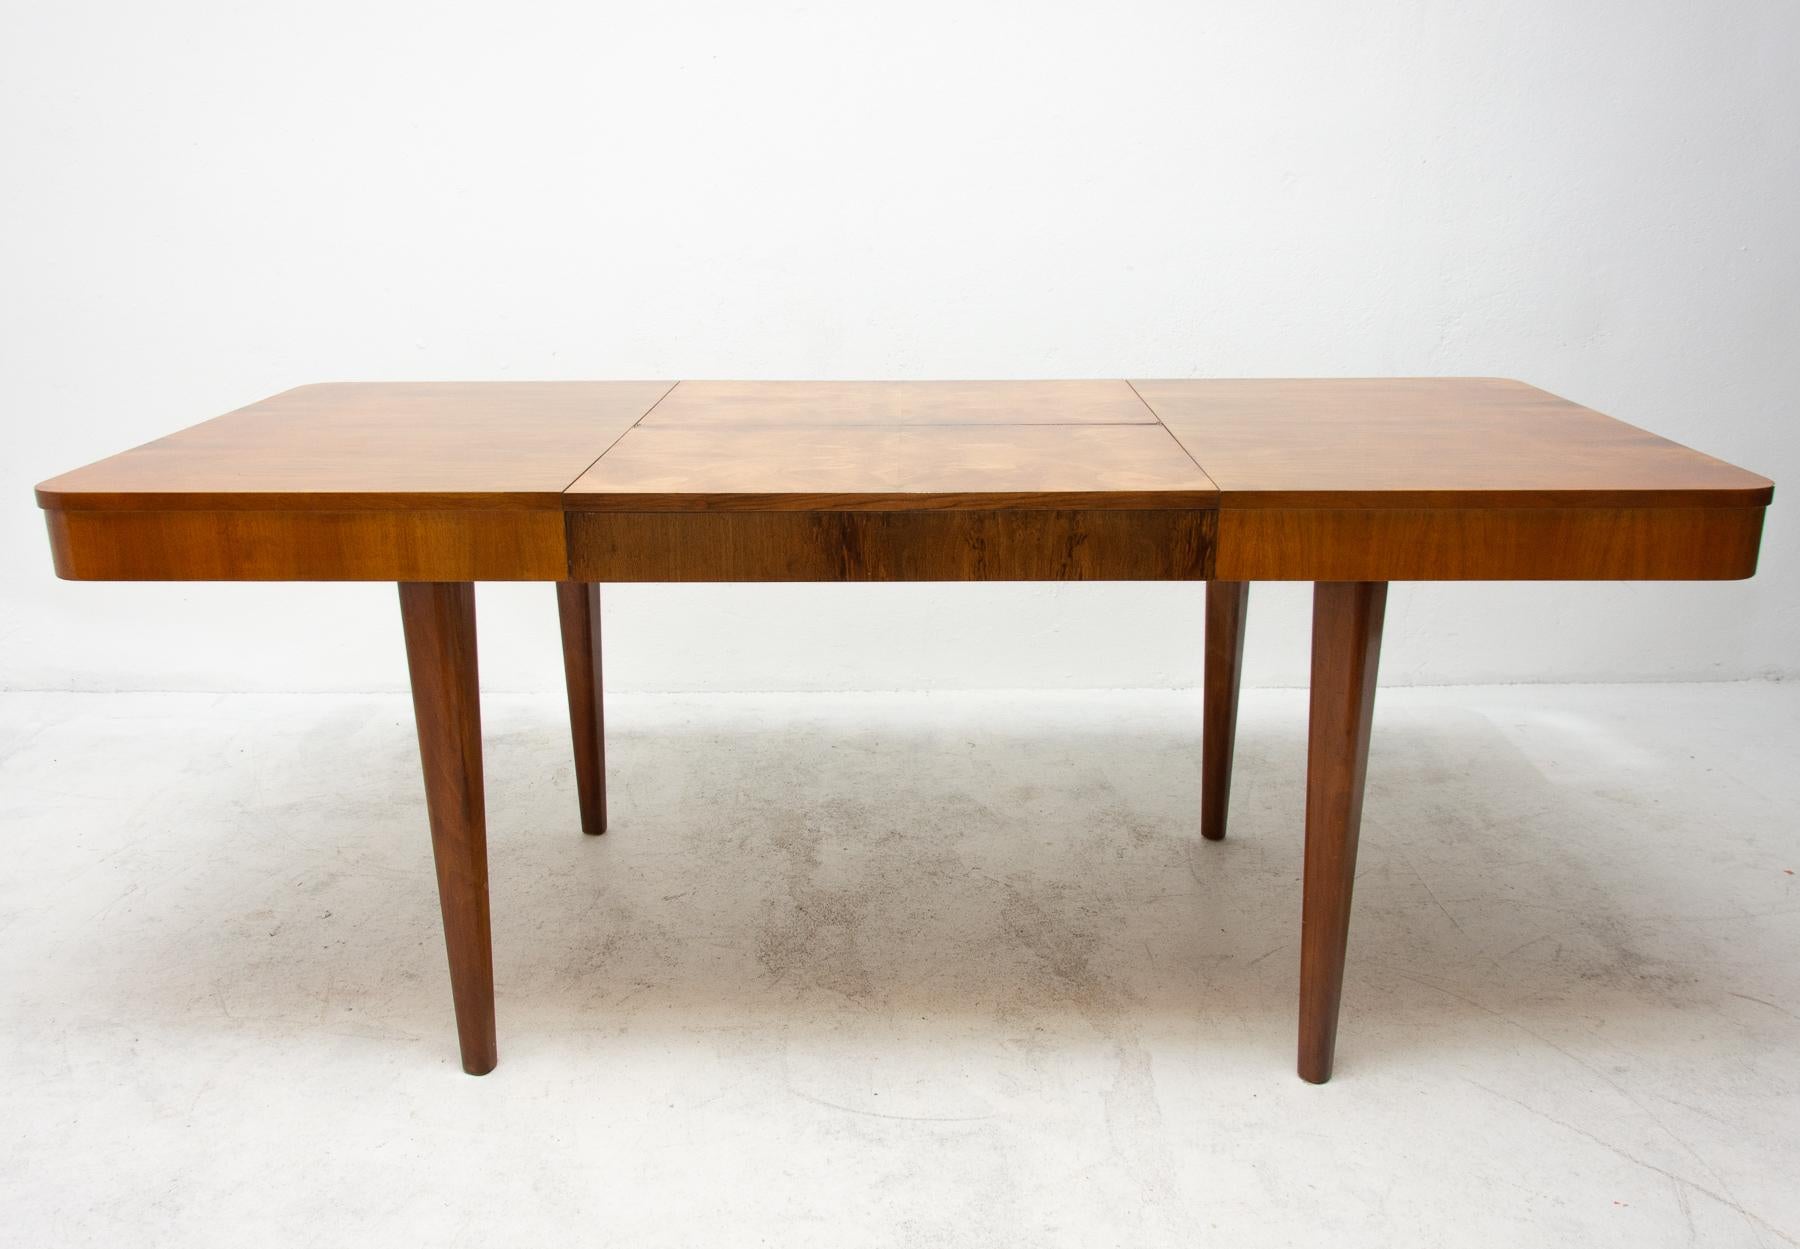 This adjustable dining table was designed and made in the 1950s in the former Czechoslovakia. It was designed by Jindrich Halabala for ÚP Závody Brno. The material is a combination of solid wood and walnut veneer. The table is in excellent Vintage